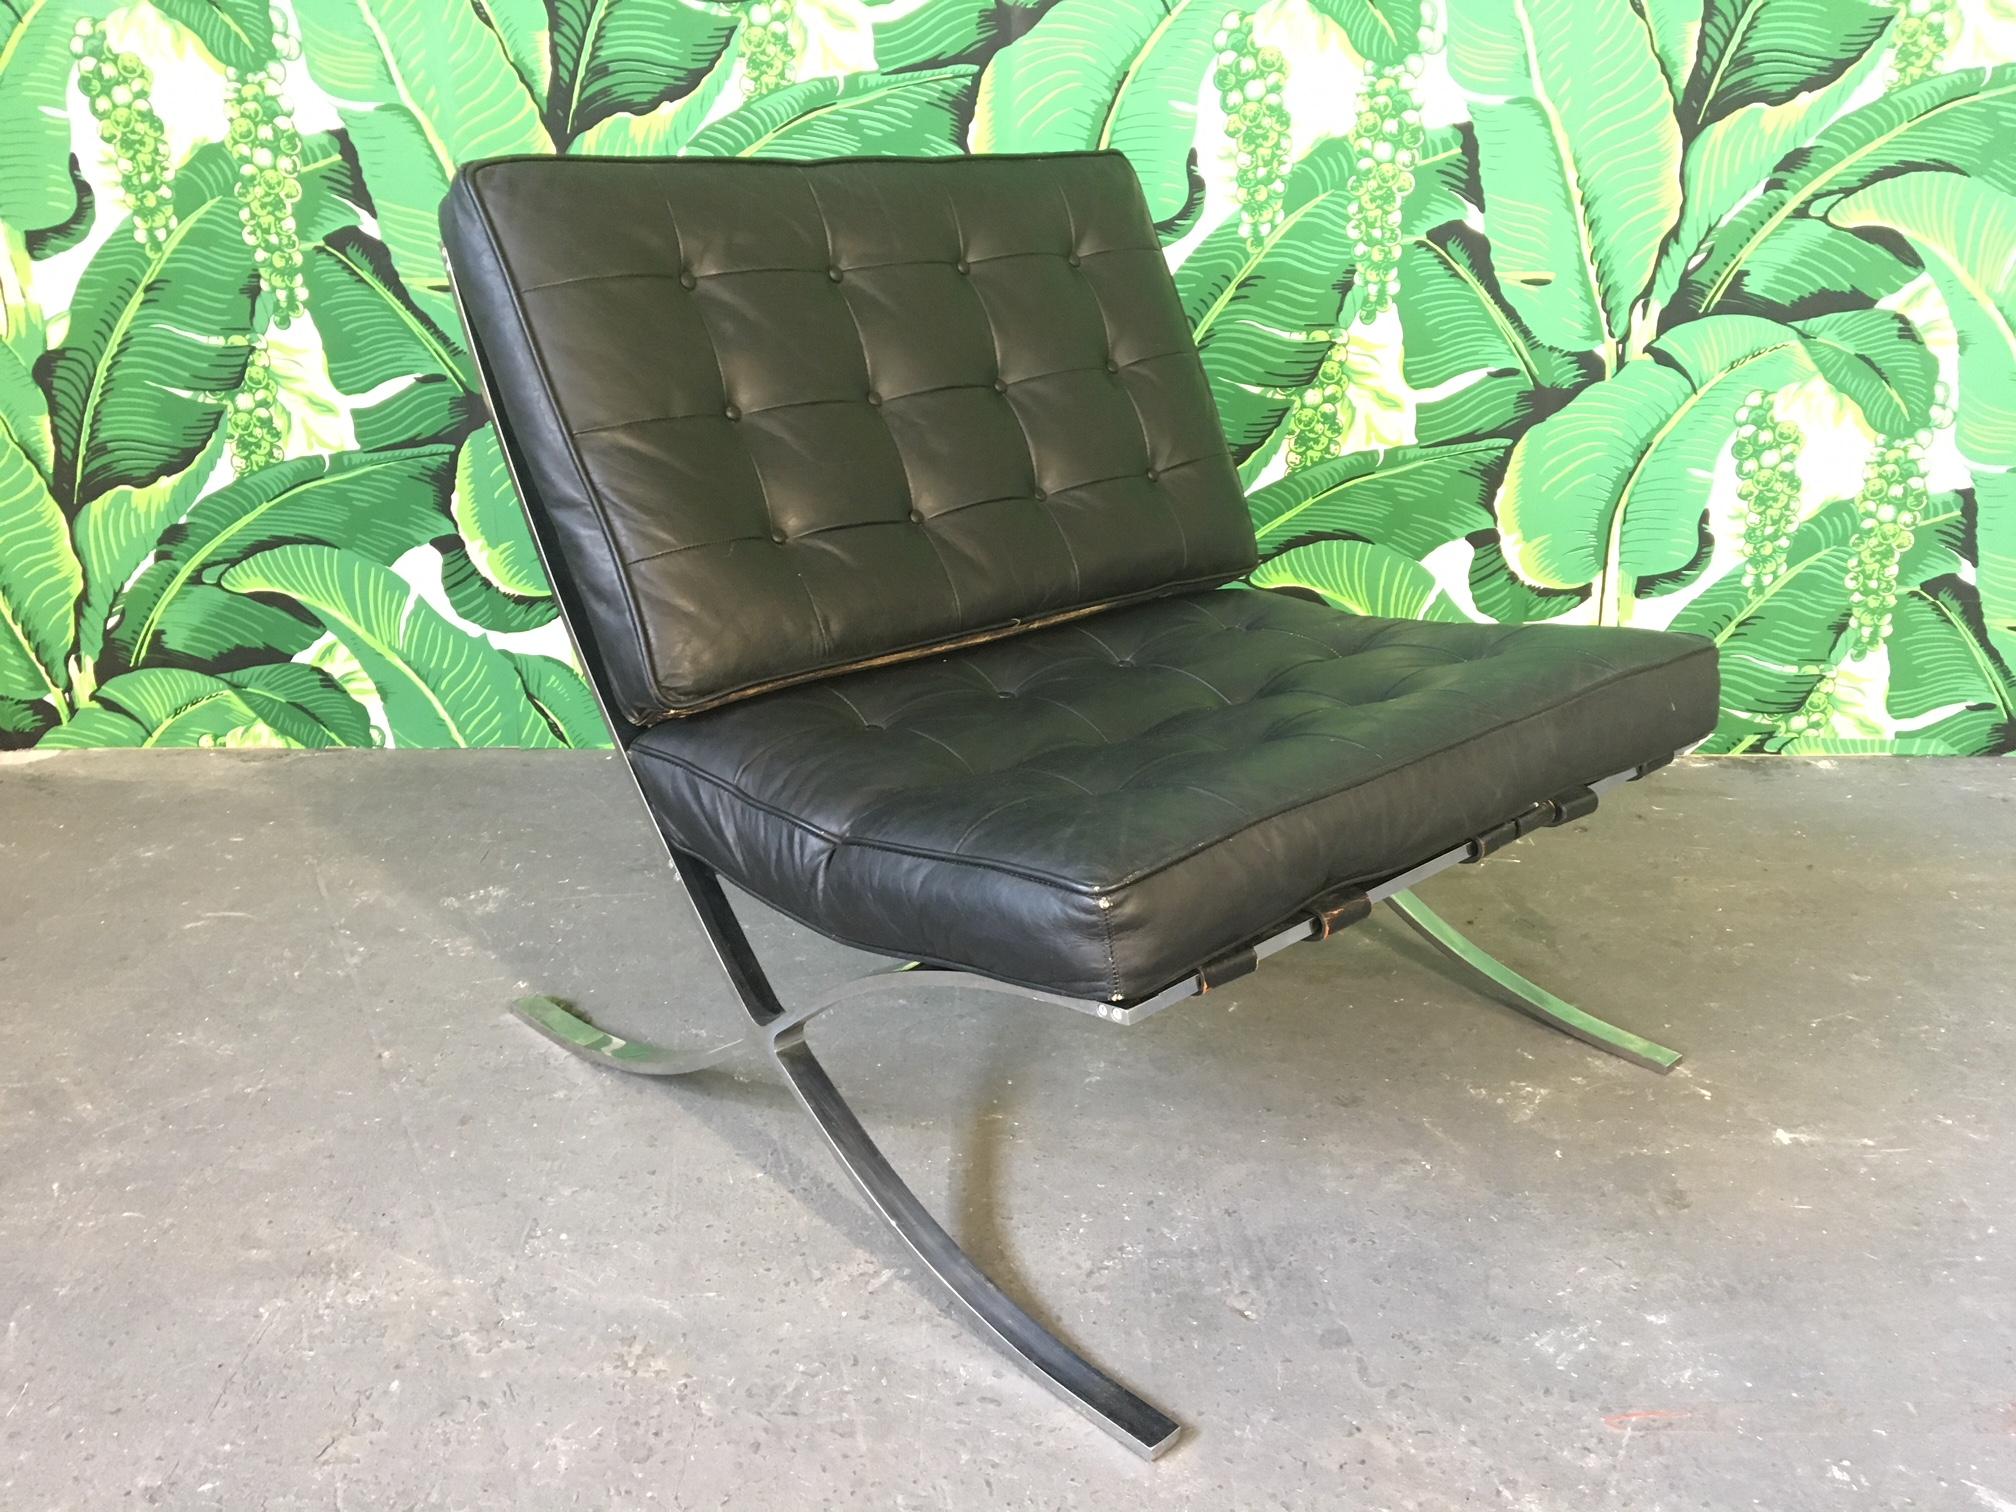 Supple leather and bright chrome make this Barcelona chair the perfect find. A midcentury staple originally designed by Ludwig Mies van der Rohe. Good vintage condition with minor wear consistent with age.